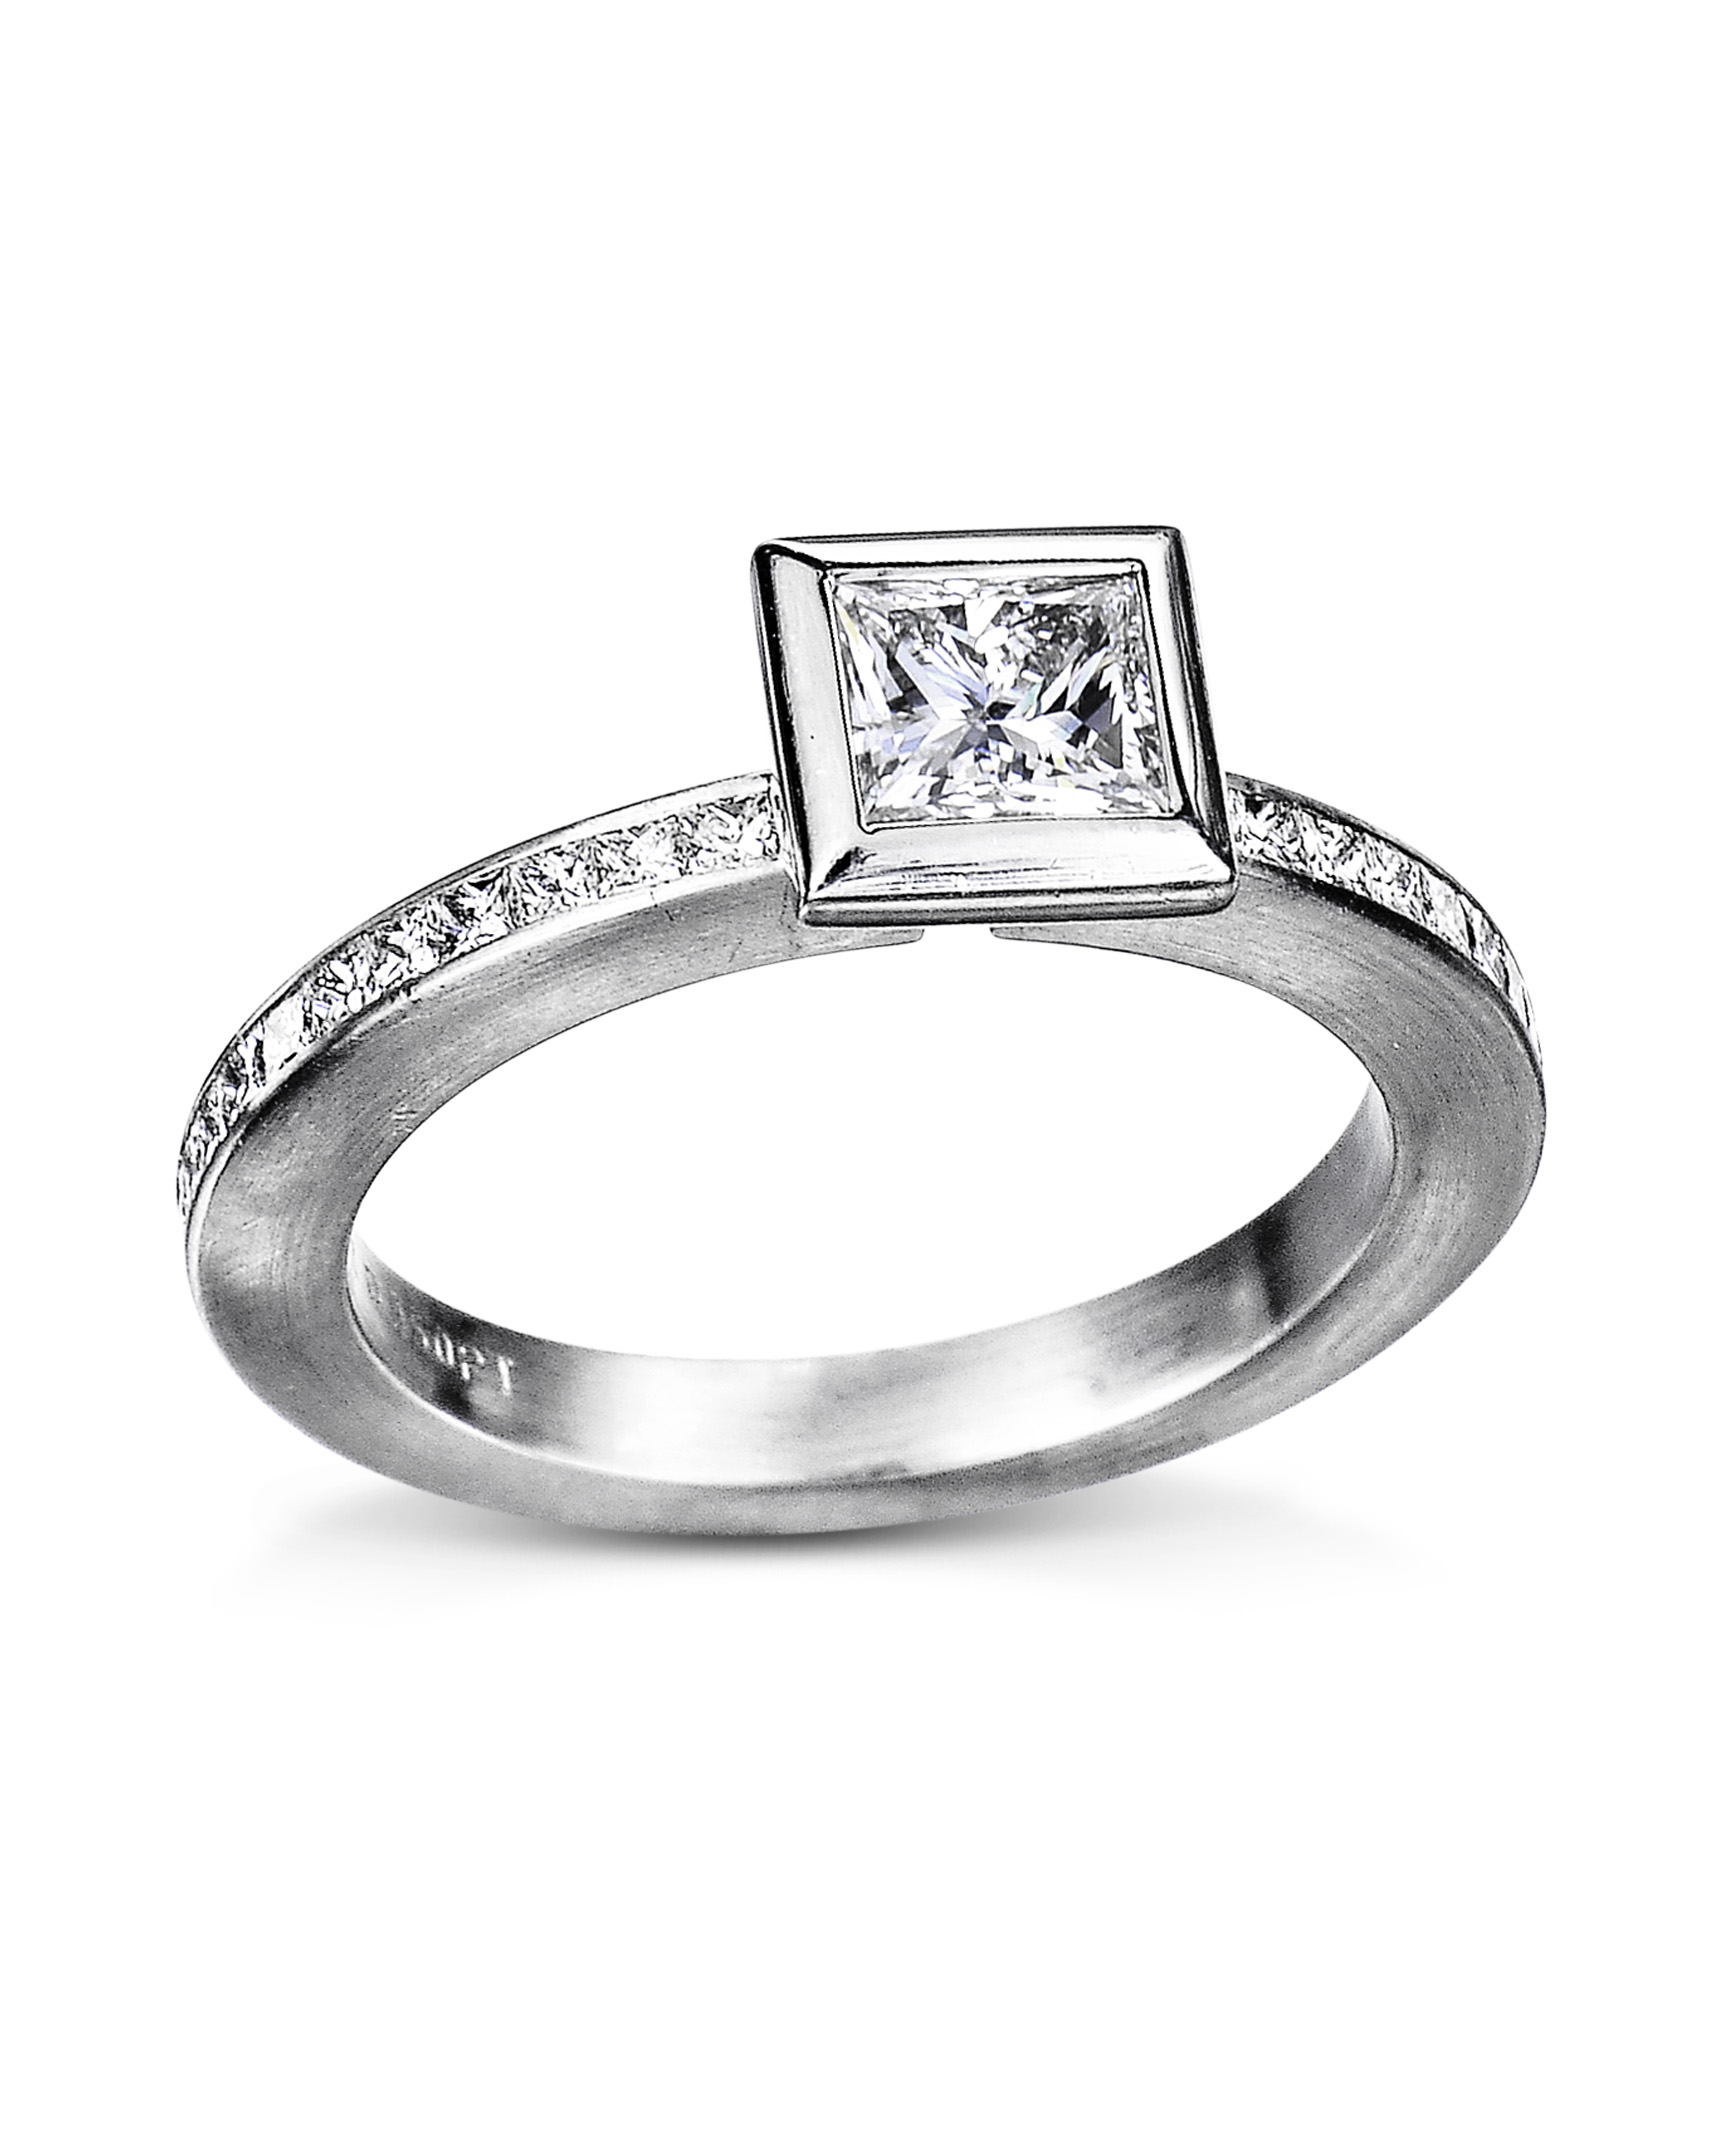 Jewelry Masters : 1 Carat Solitaire Princess Cut Diamond Engagement Ring  [4947-BY] - $4995.00 (10000.00)